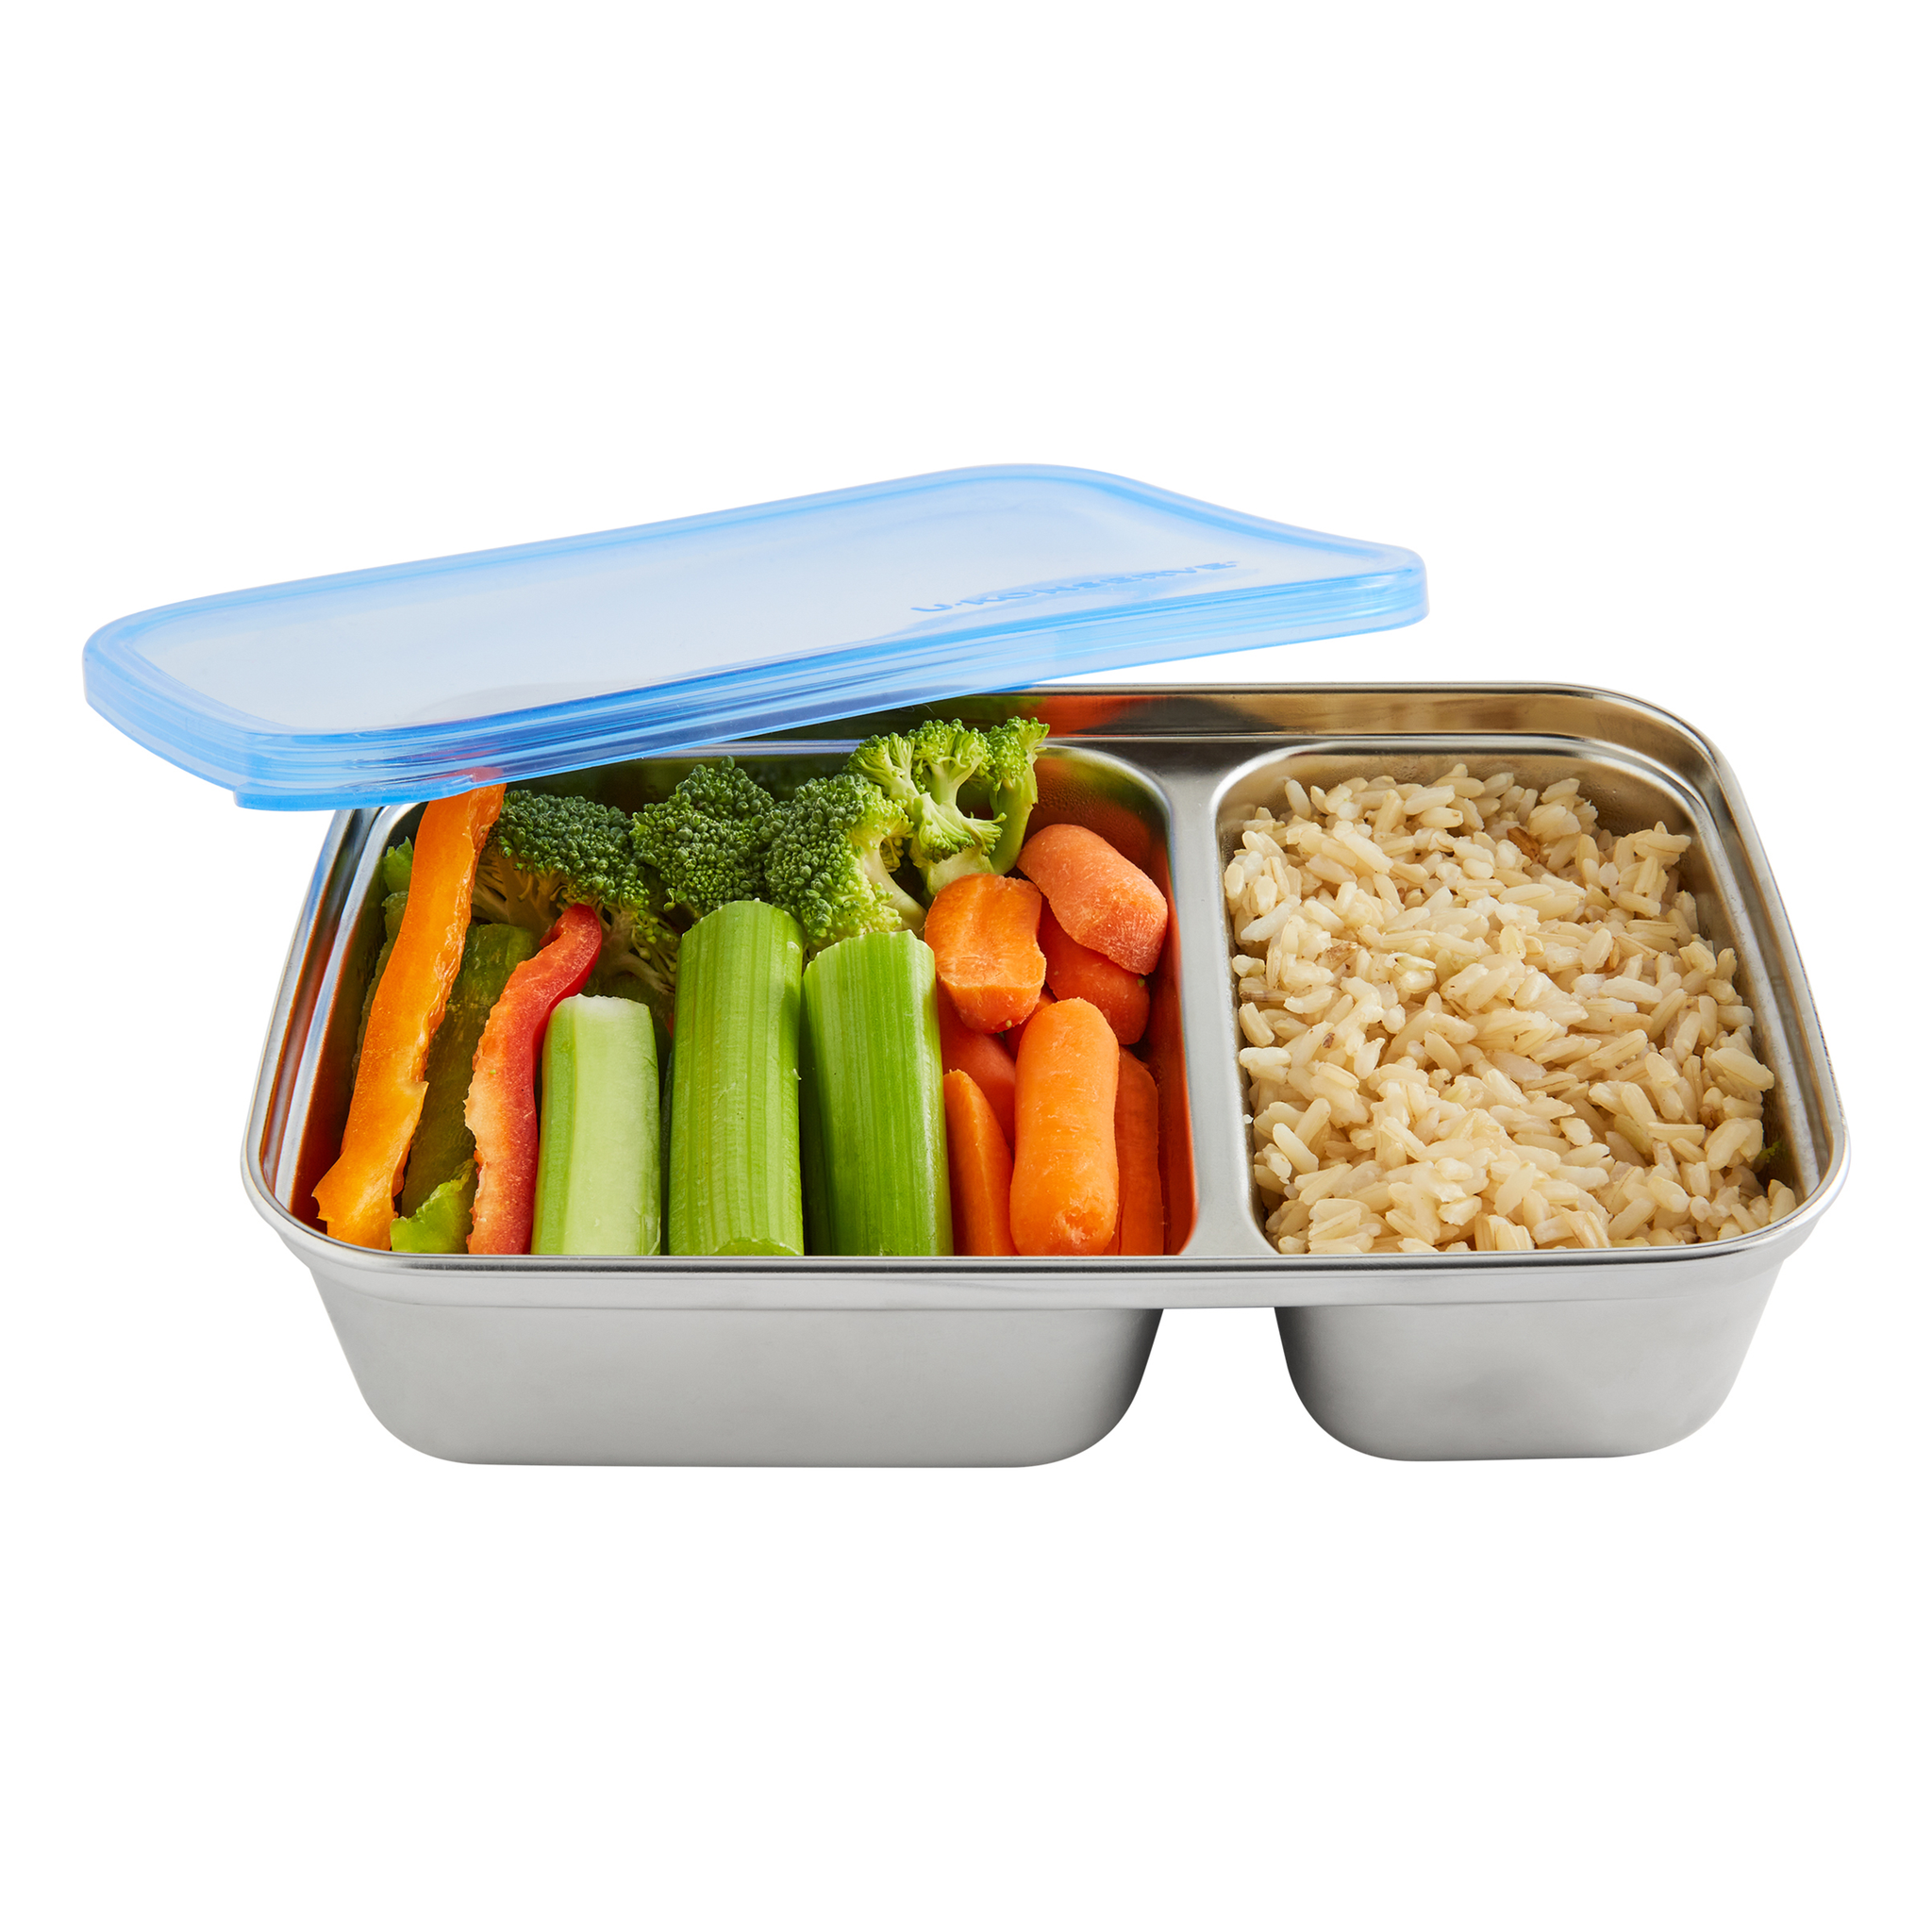 Rectangle Stainless Steel Food Container | U-Konserve 25oz / Island Teal / Silicone Lid